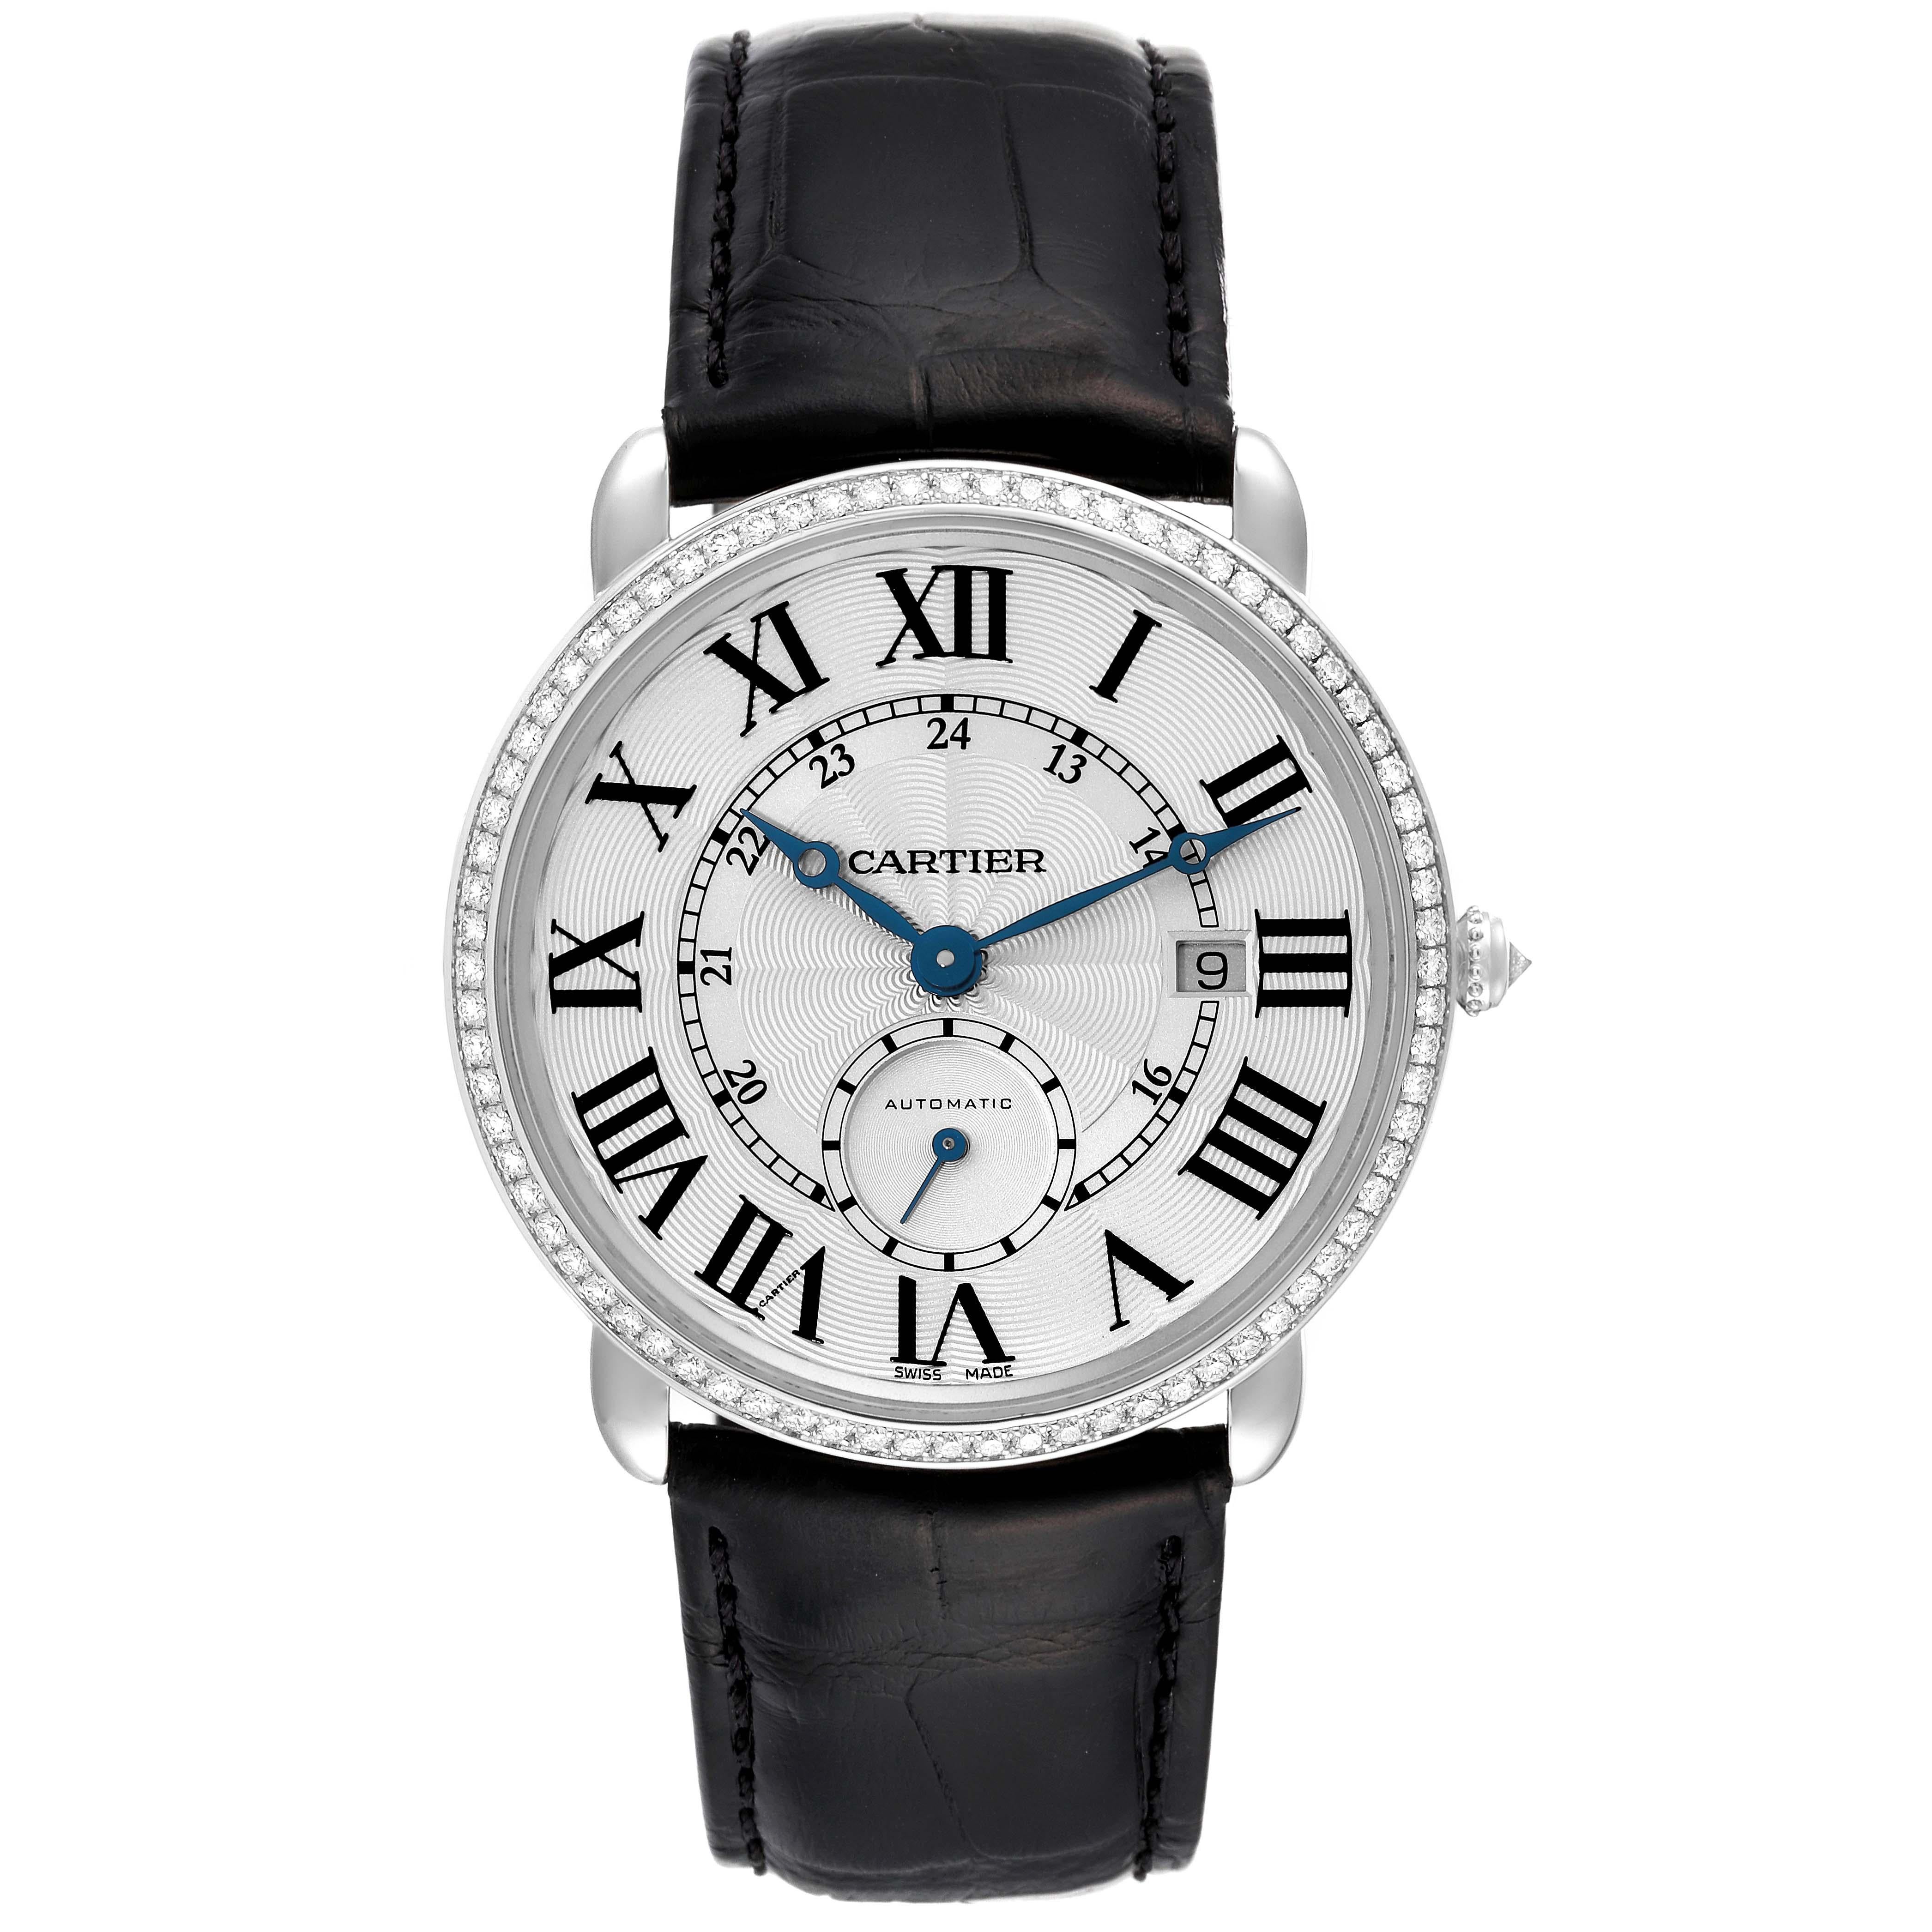 Cartier Ronde Louis White Gold Diamond Bezel Silver Dial Mens Watch 3685. Automatic self-winding movement. 18k white gold case 40.0 mm in diameter. Transparent exhibition sapphire crystal case back. Circular grained crown set with an original